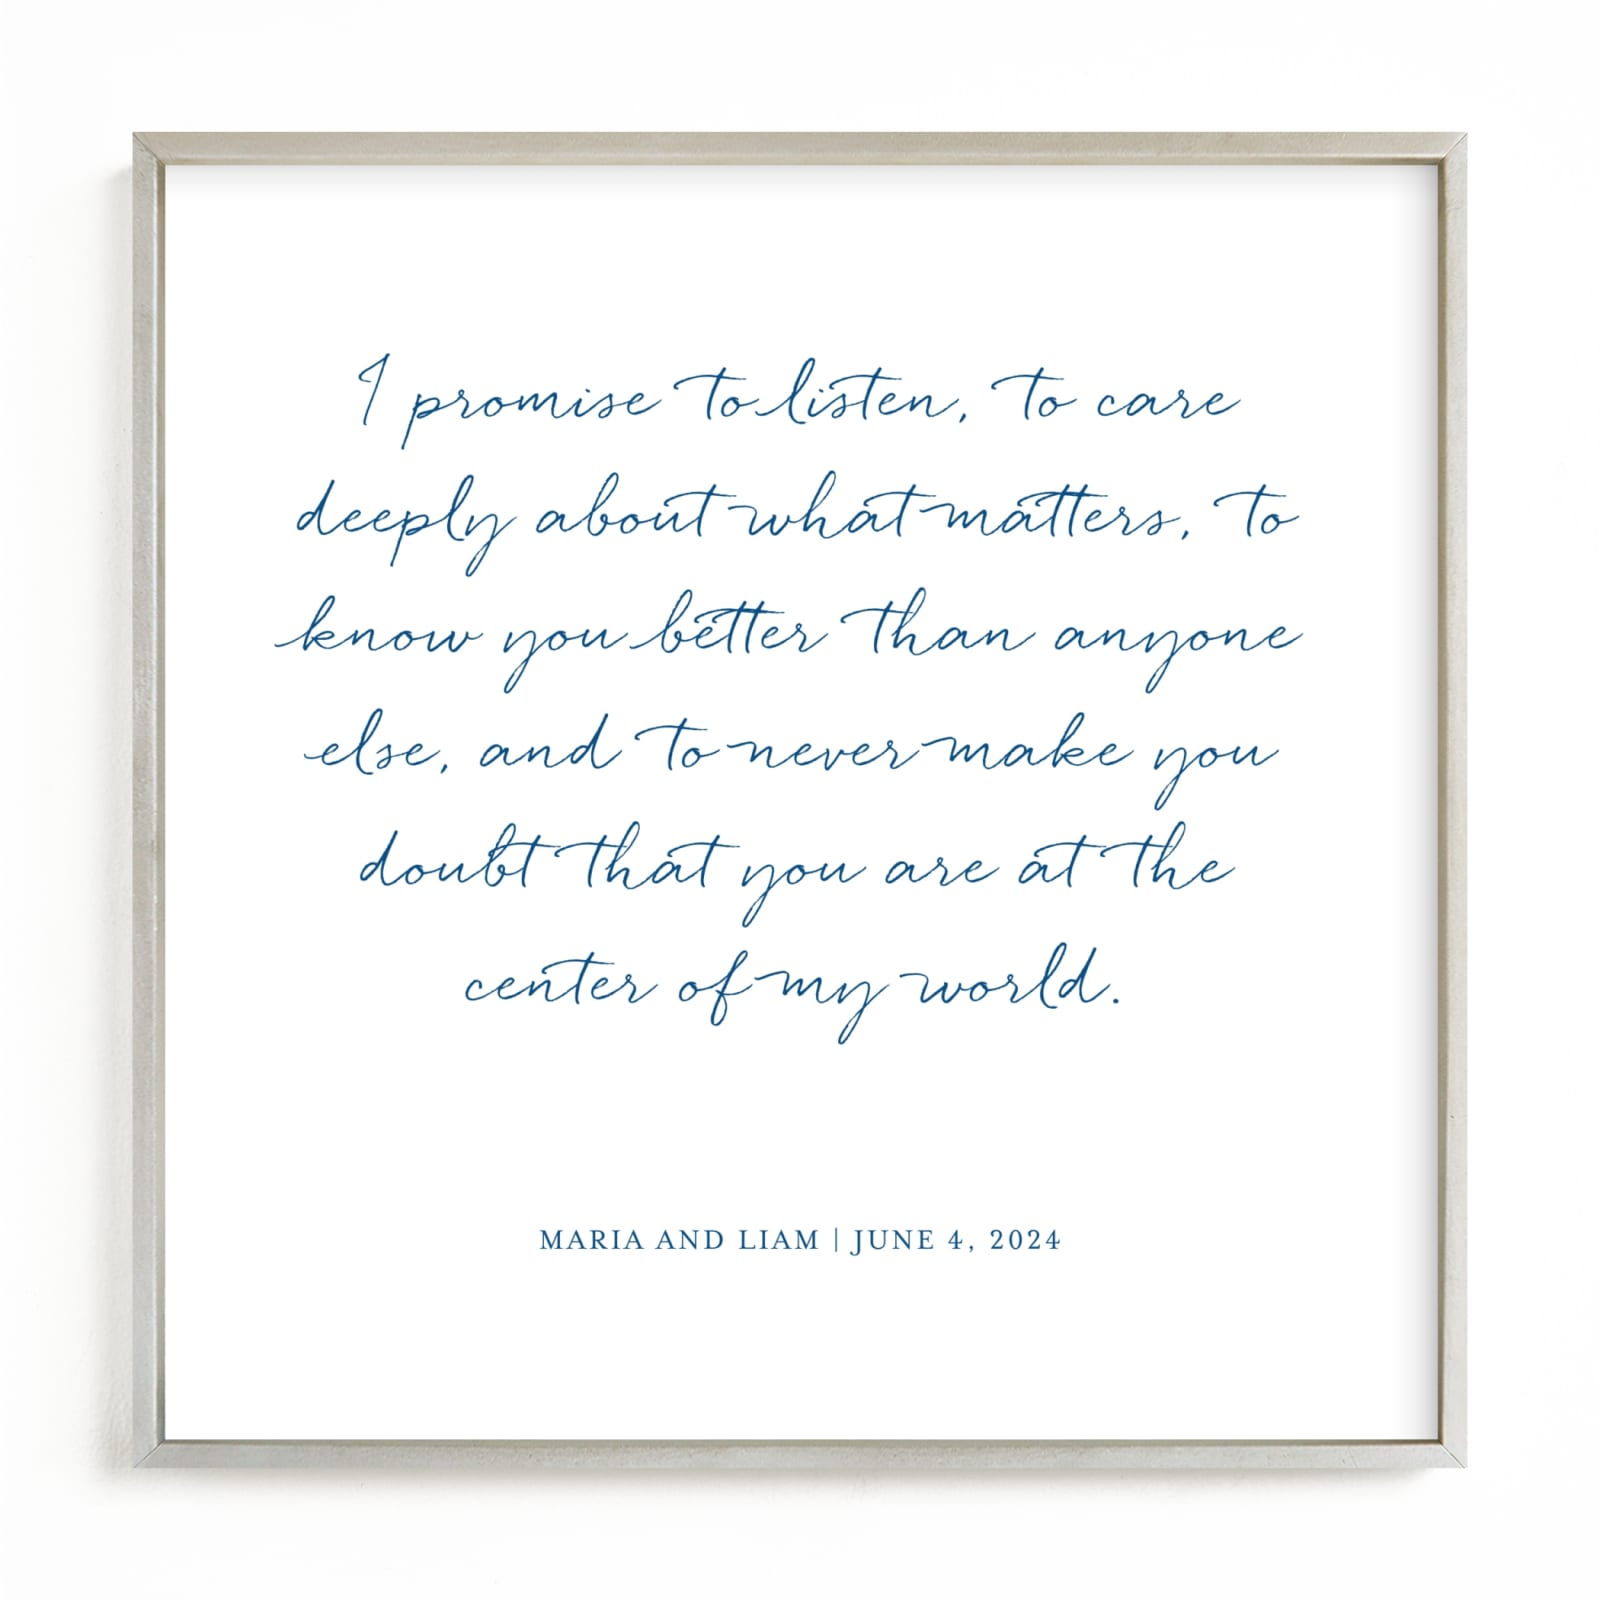 This is a blue photos to art by Minted called Your Vows as an Art Print.